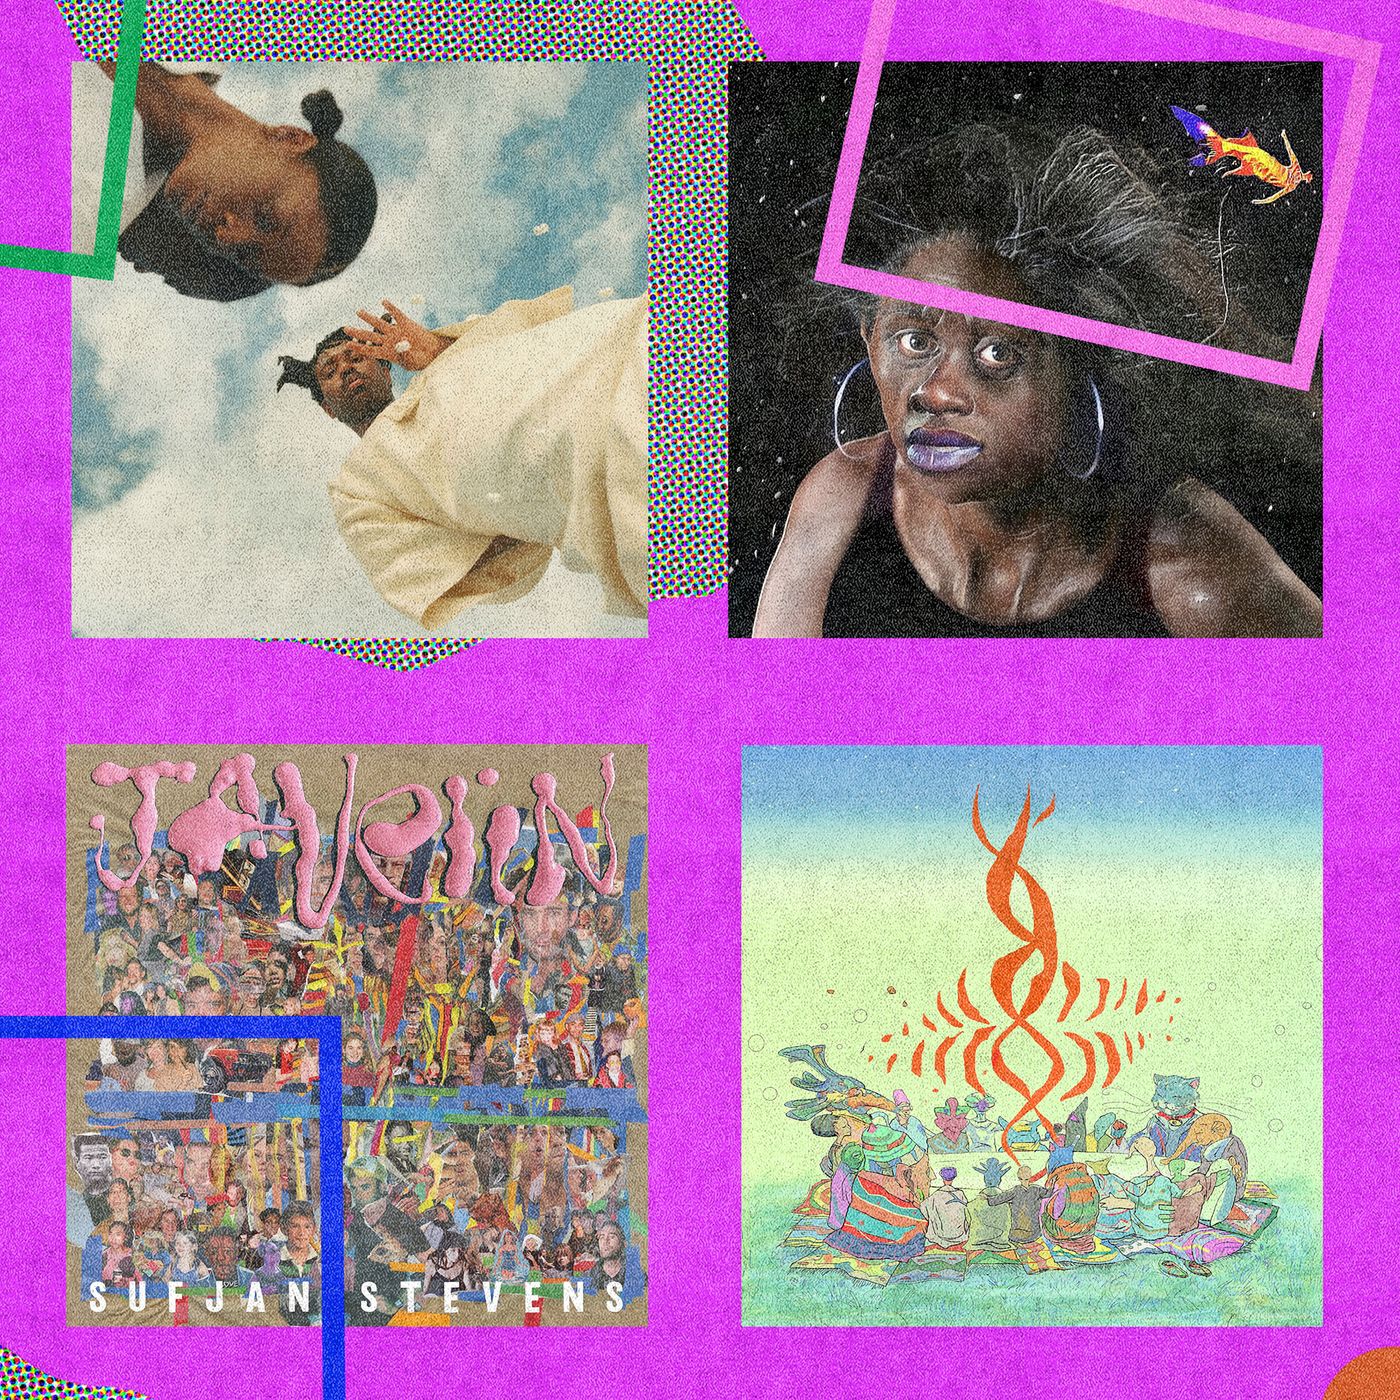 Little alchemy (@lil.alchemy.lil_)'s videos with 3:15 (Slowed Down